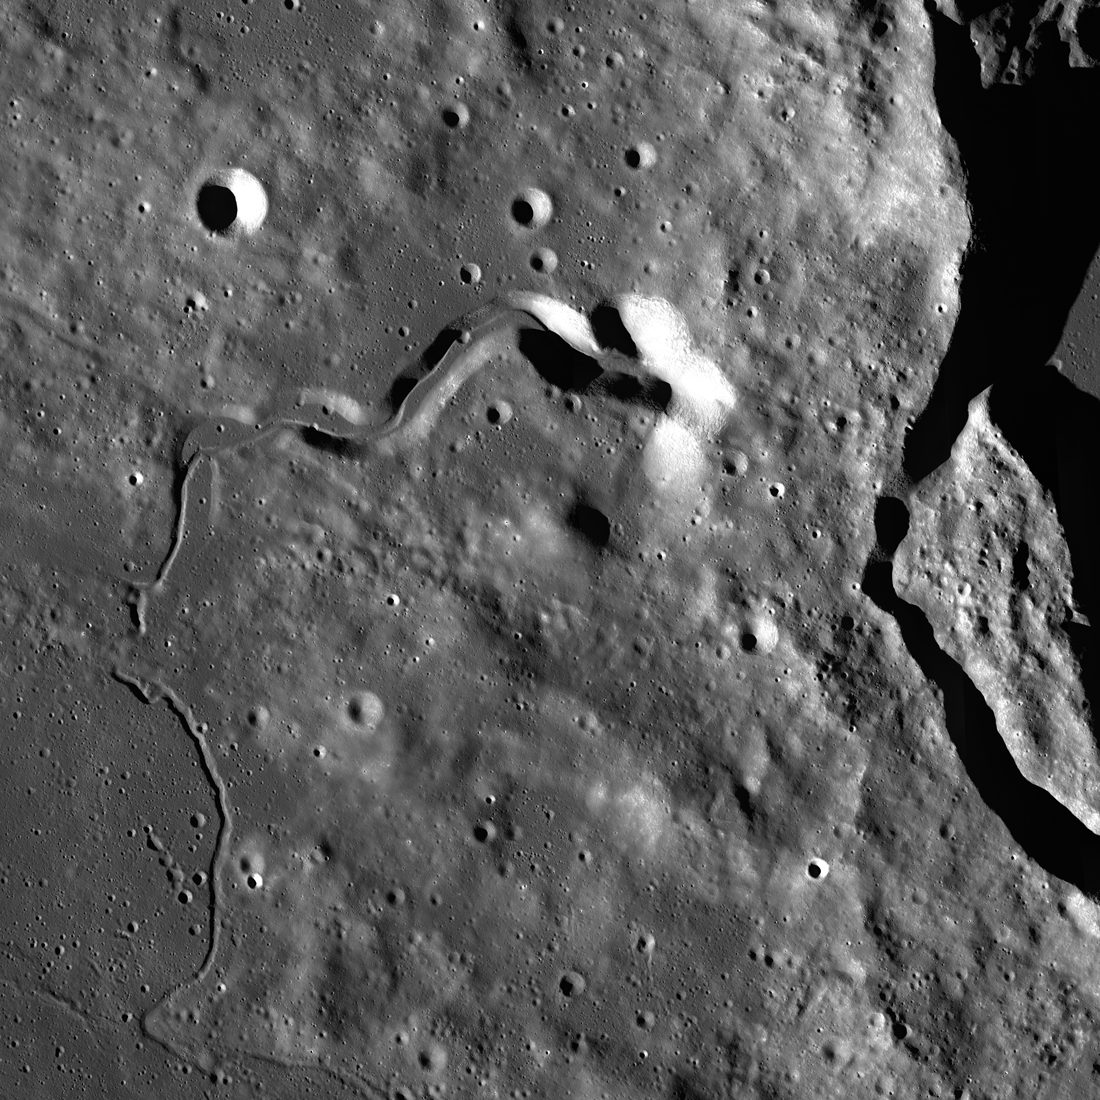 The west side of Plato